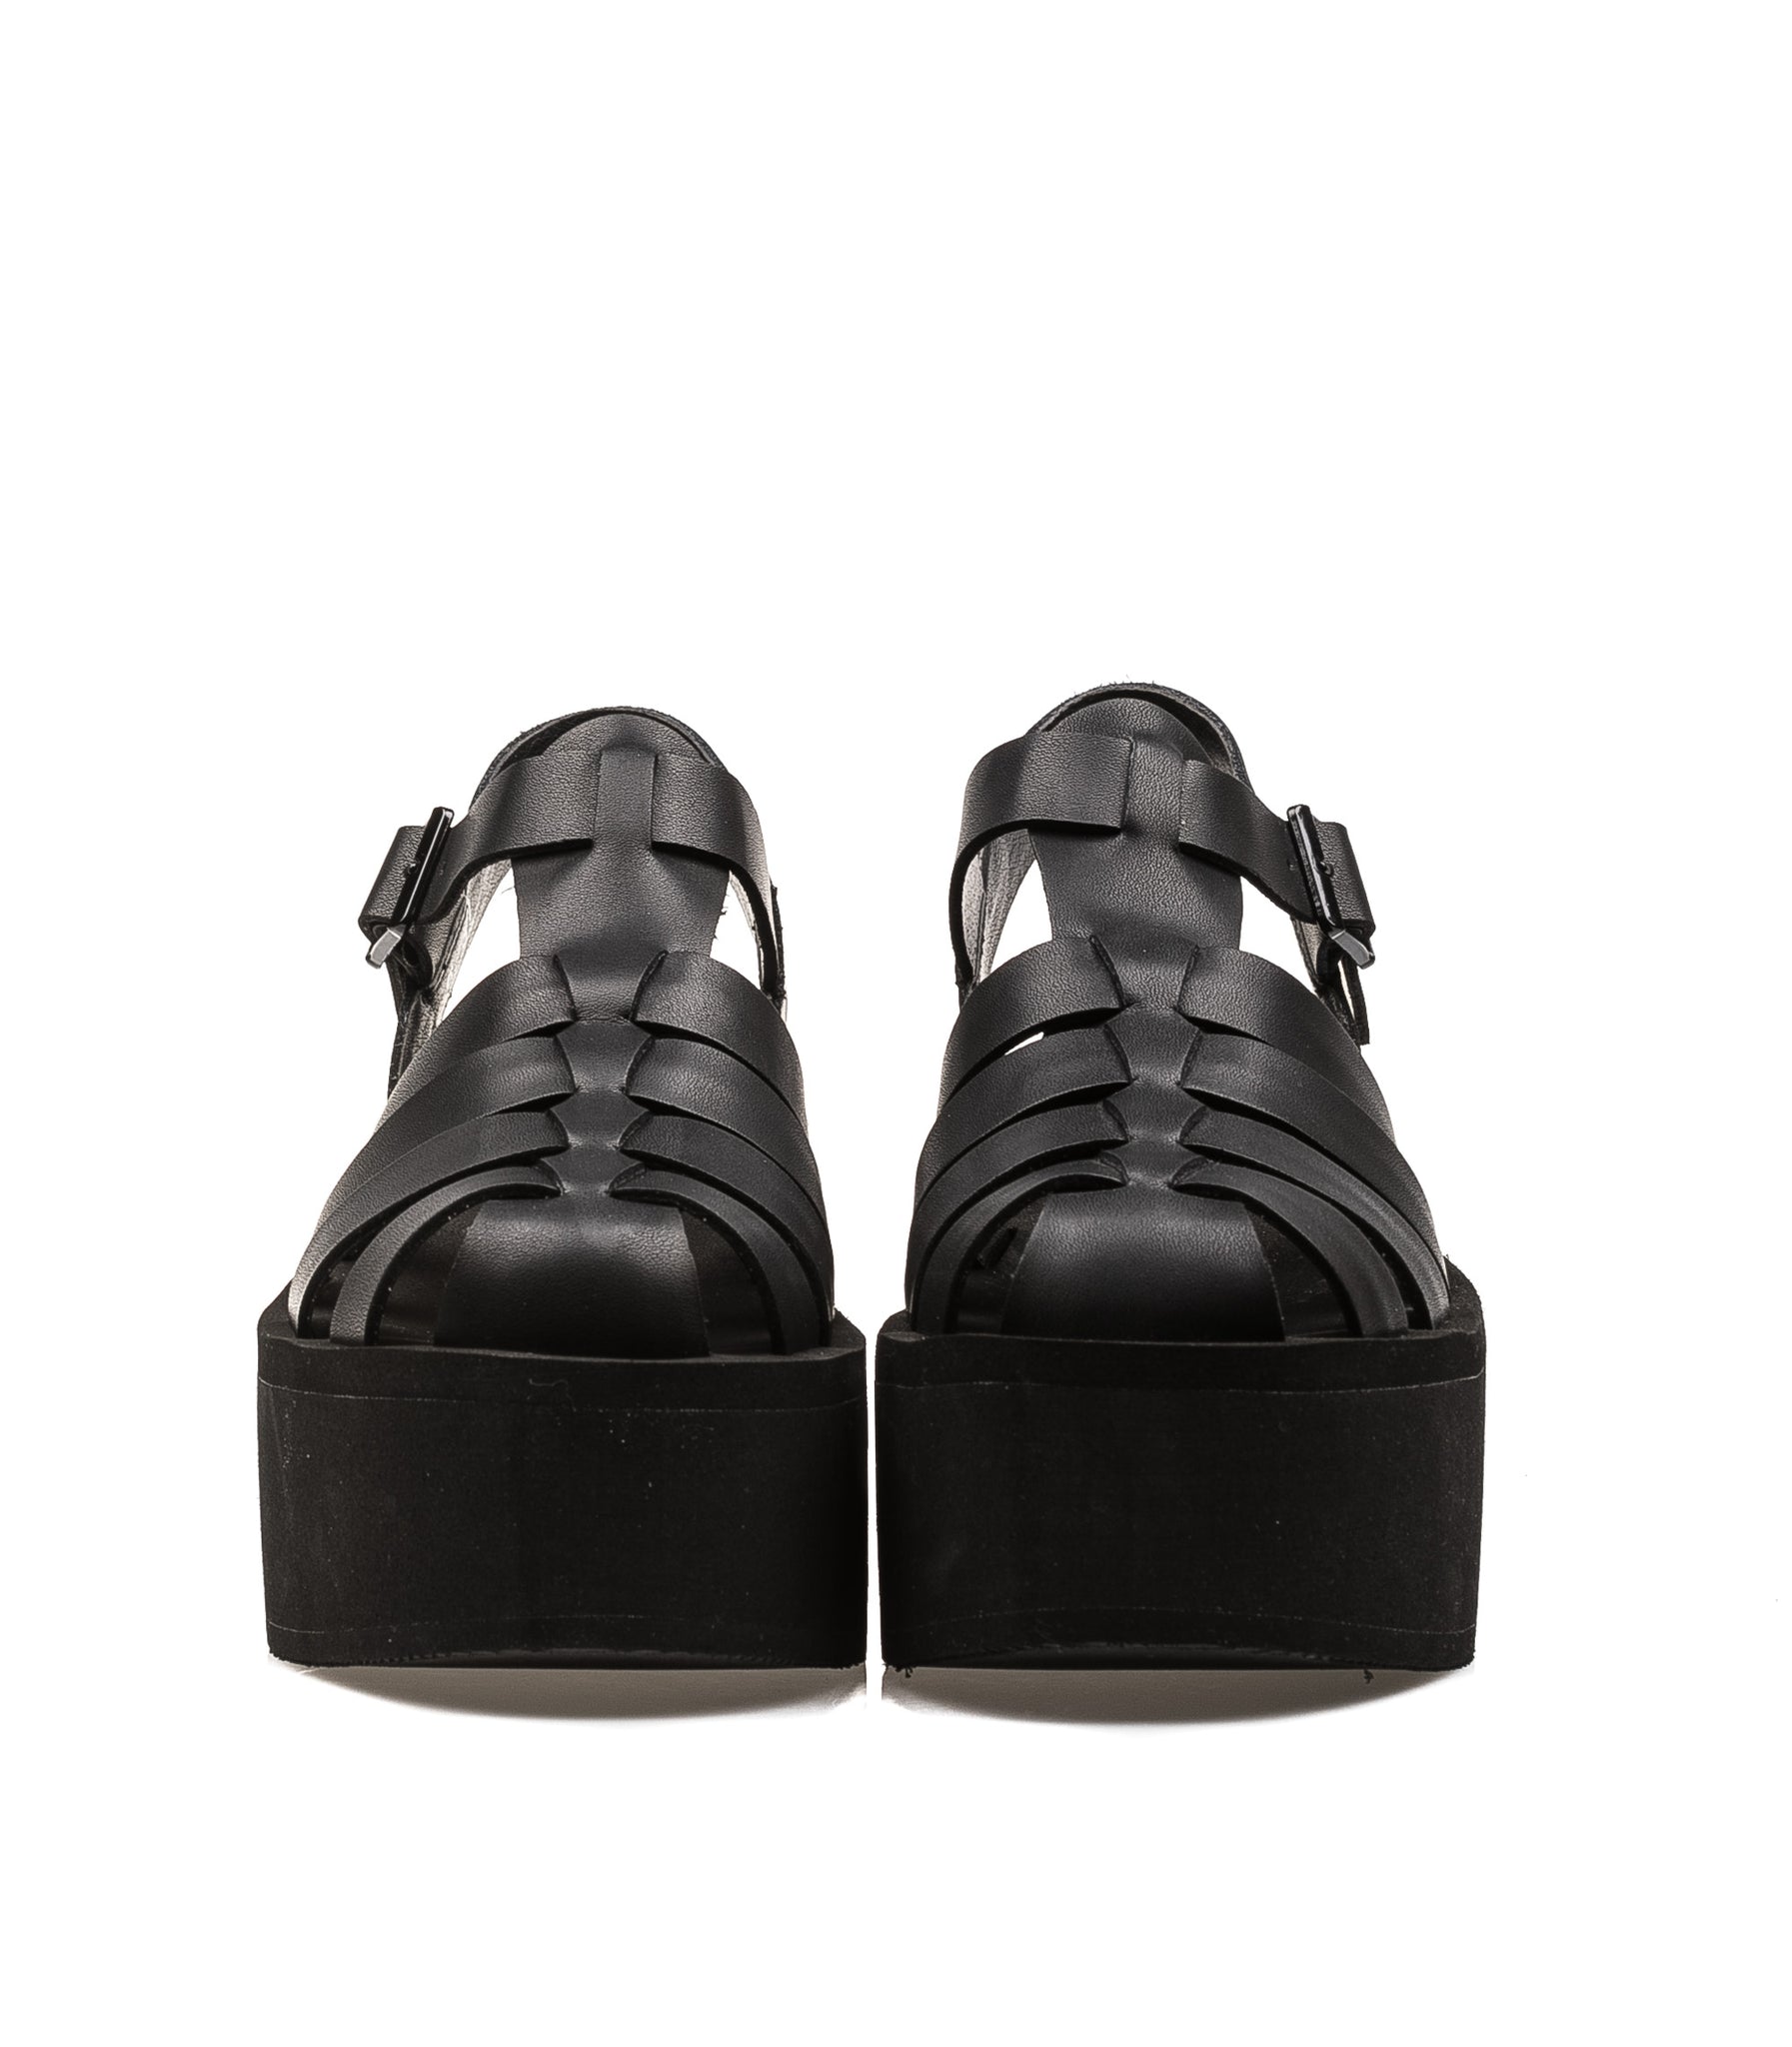 Windsorsmith Smooth Action Sandals Black Women